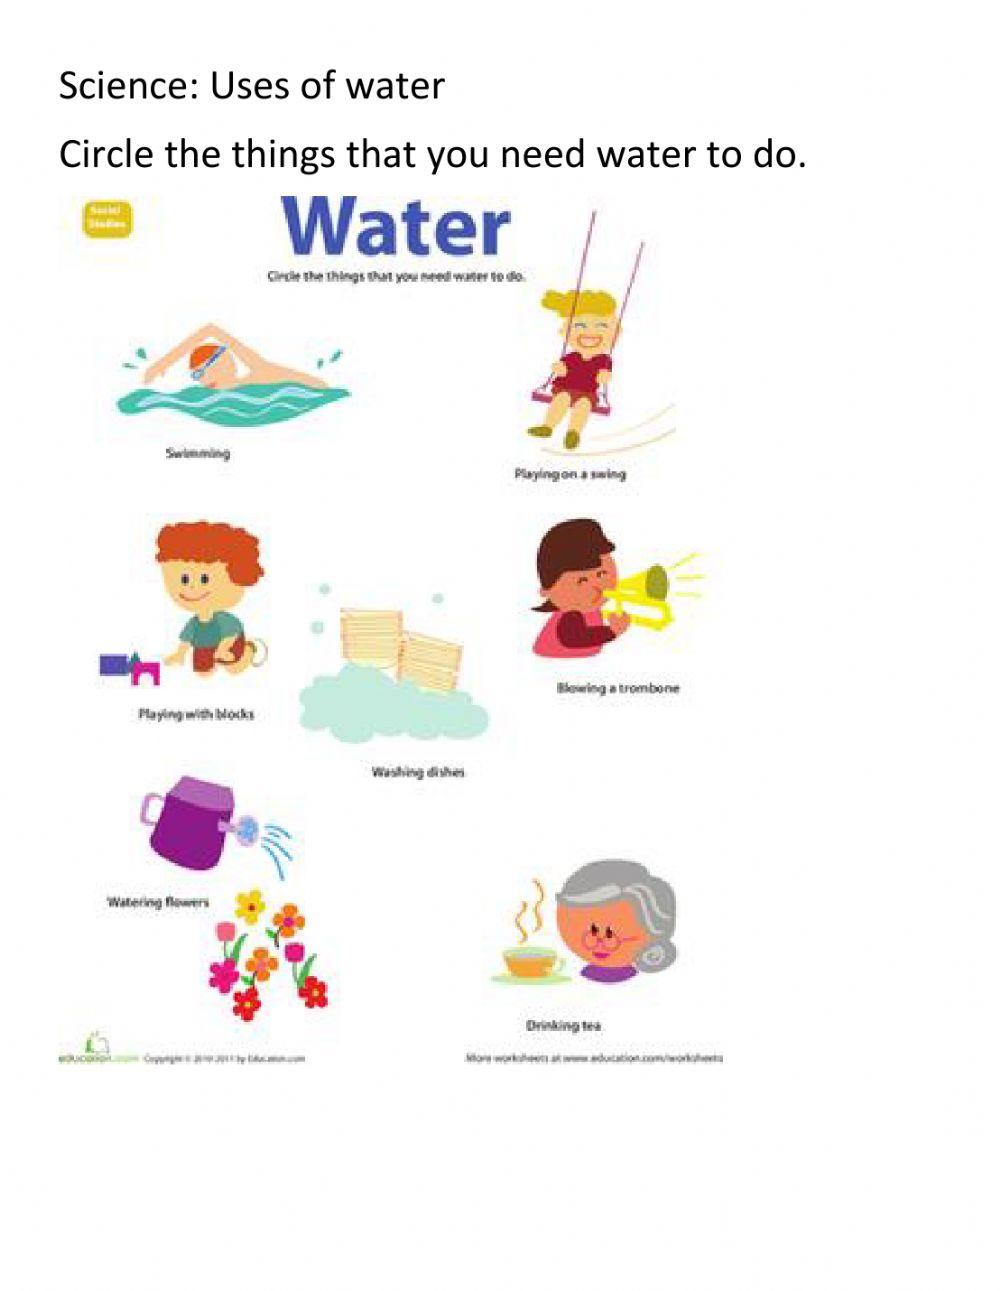 Science Uses of water